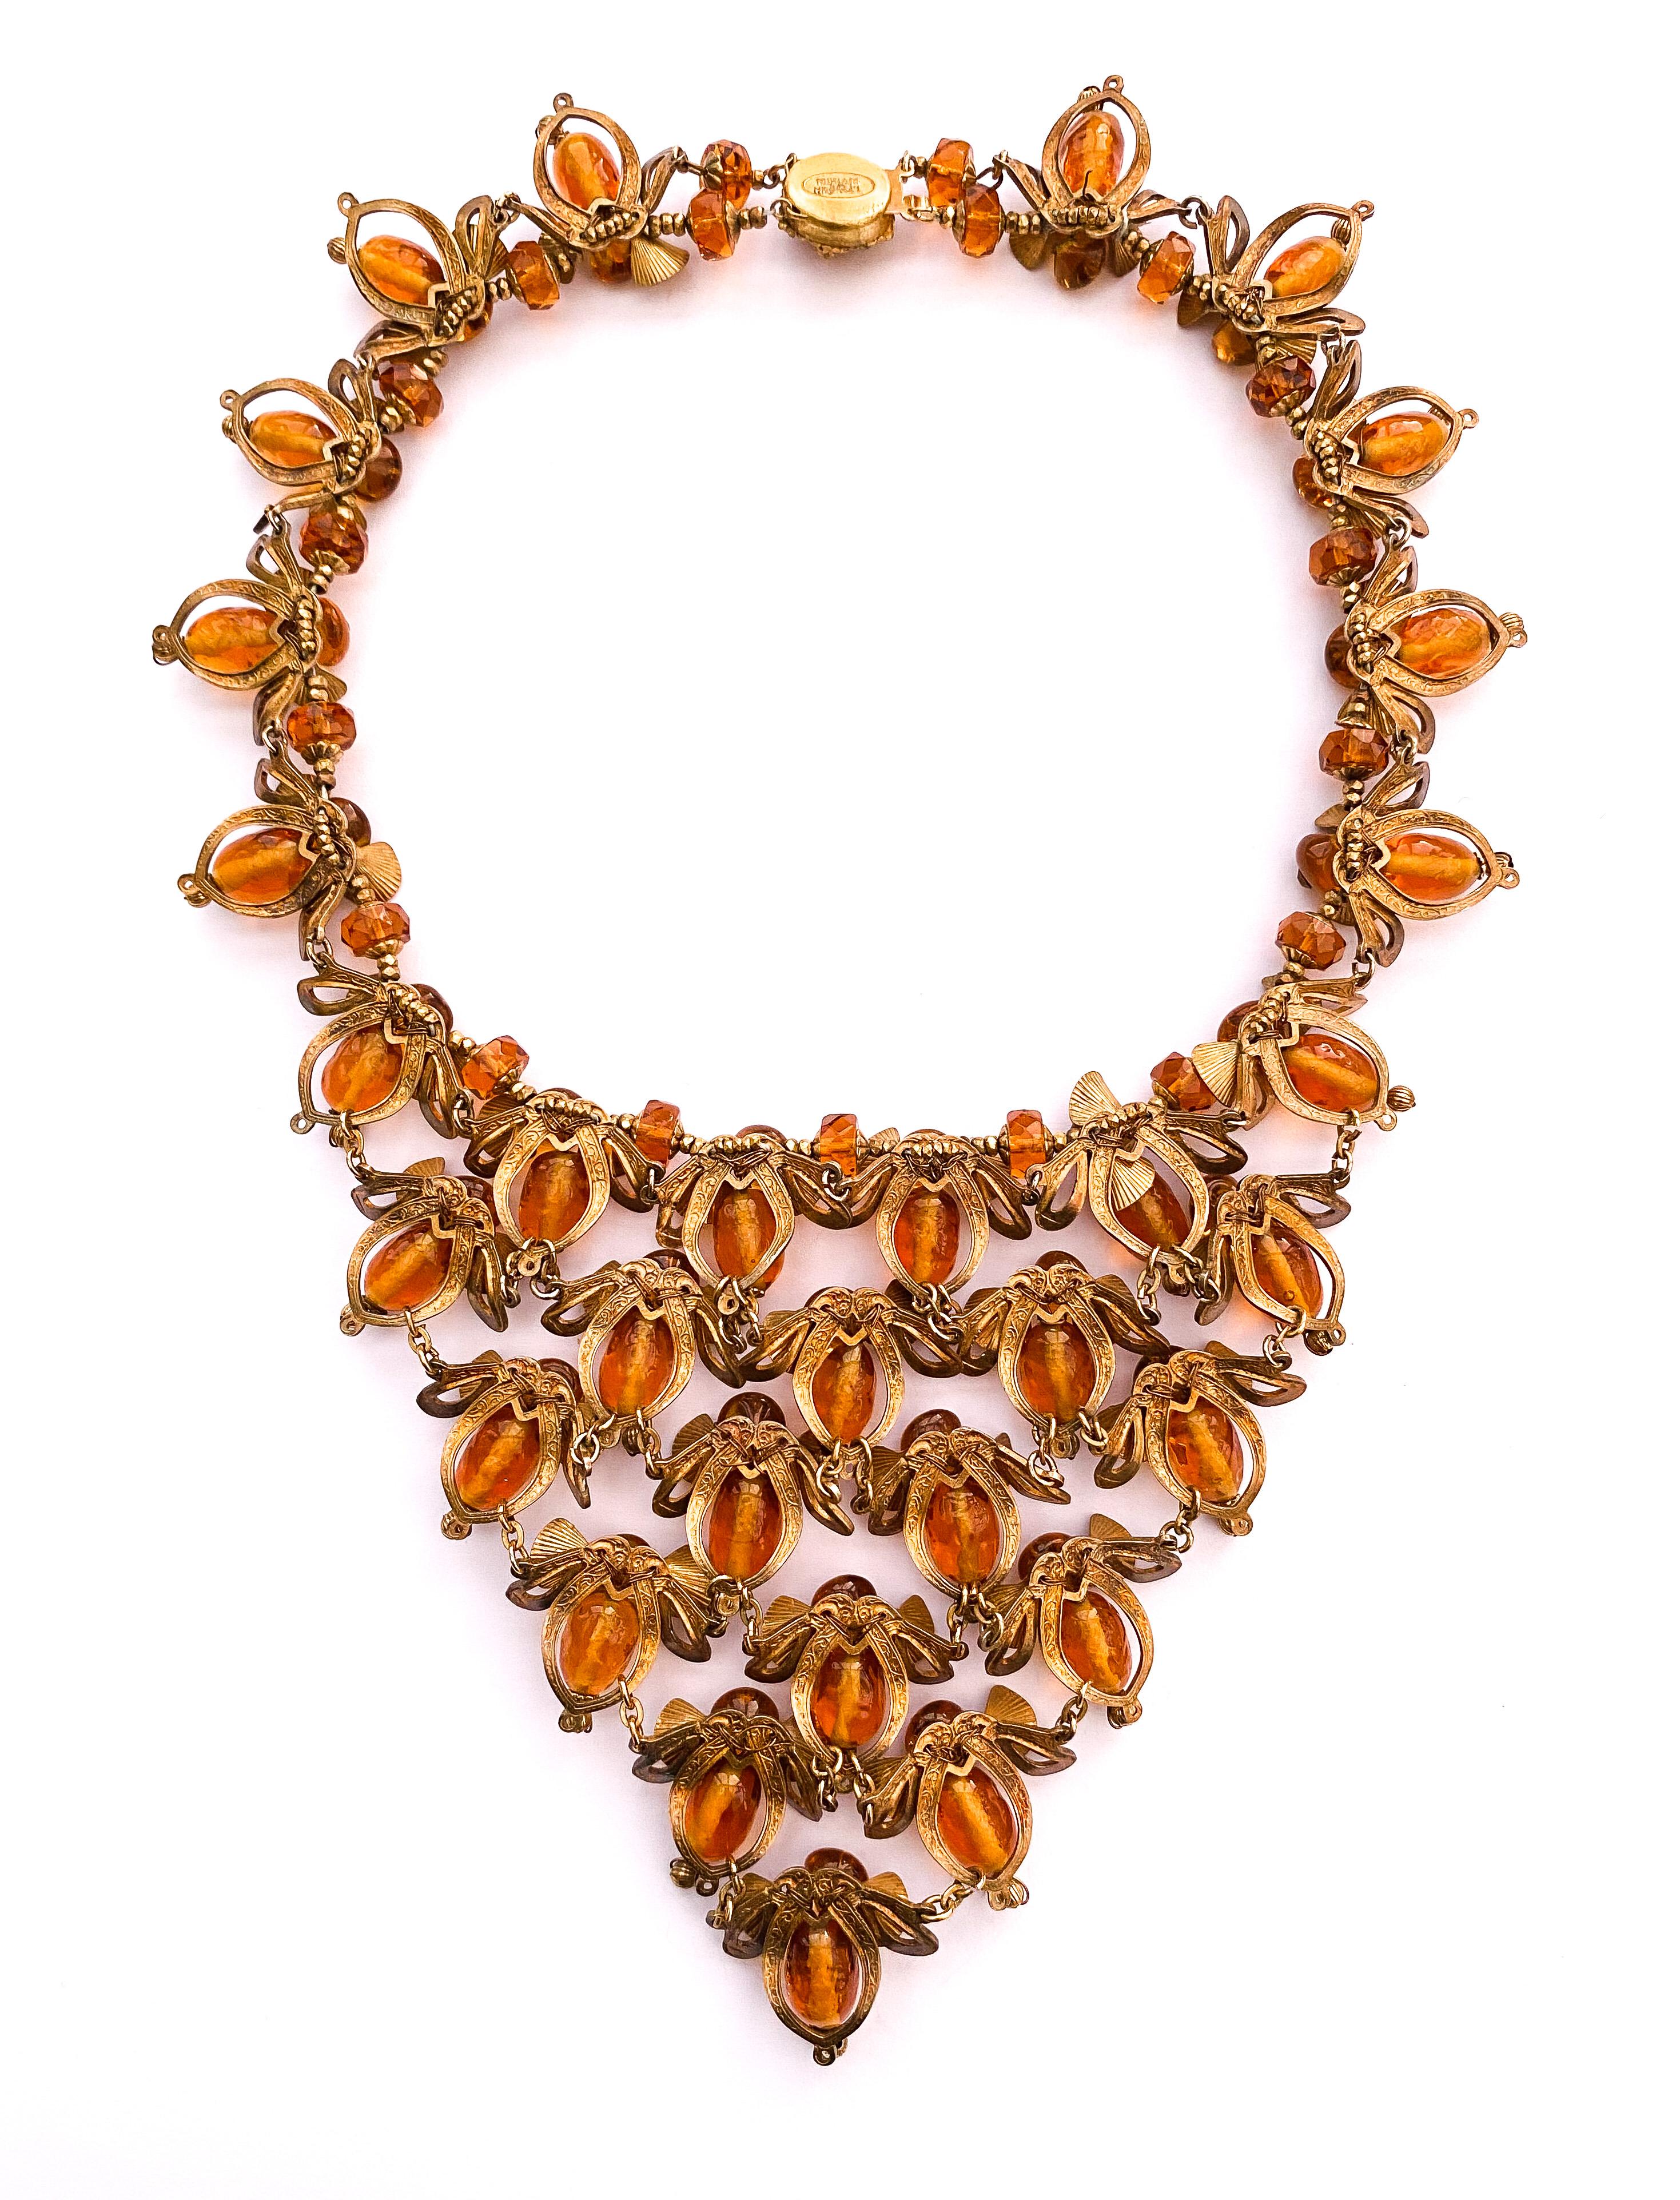 A magnificent topaz glass bead necklace, with 'bee' motif, Miriam Haskell, c1965 For Sale 8